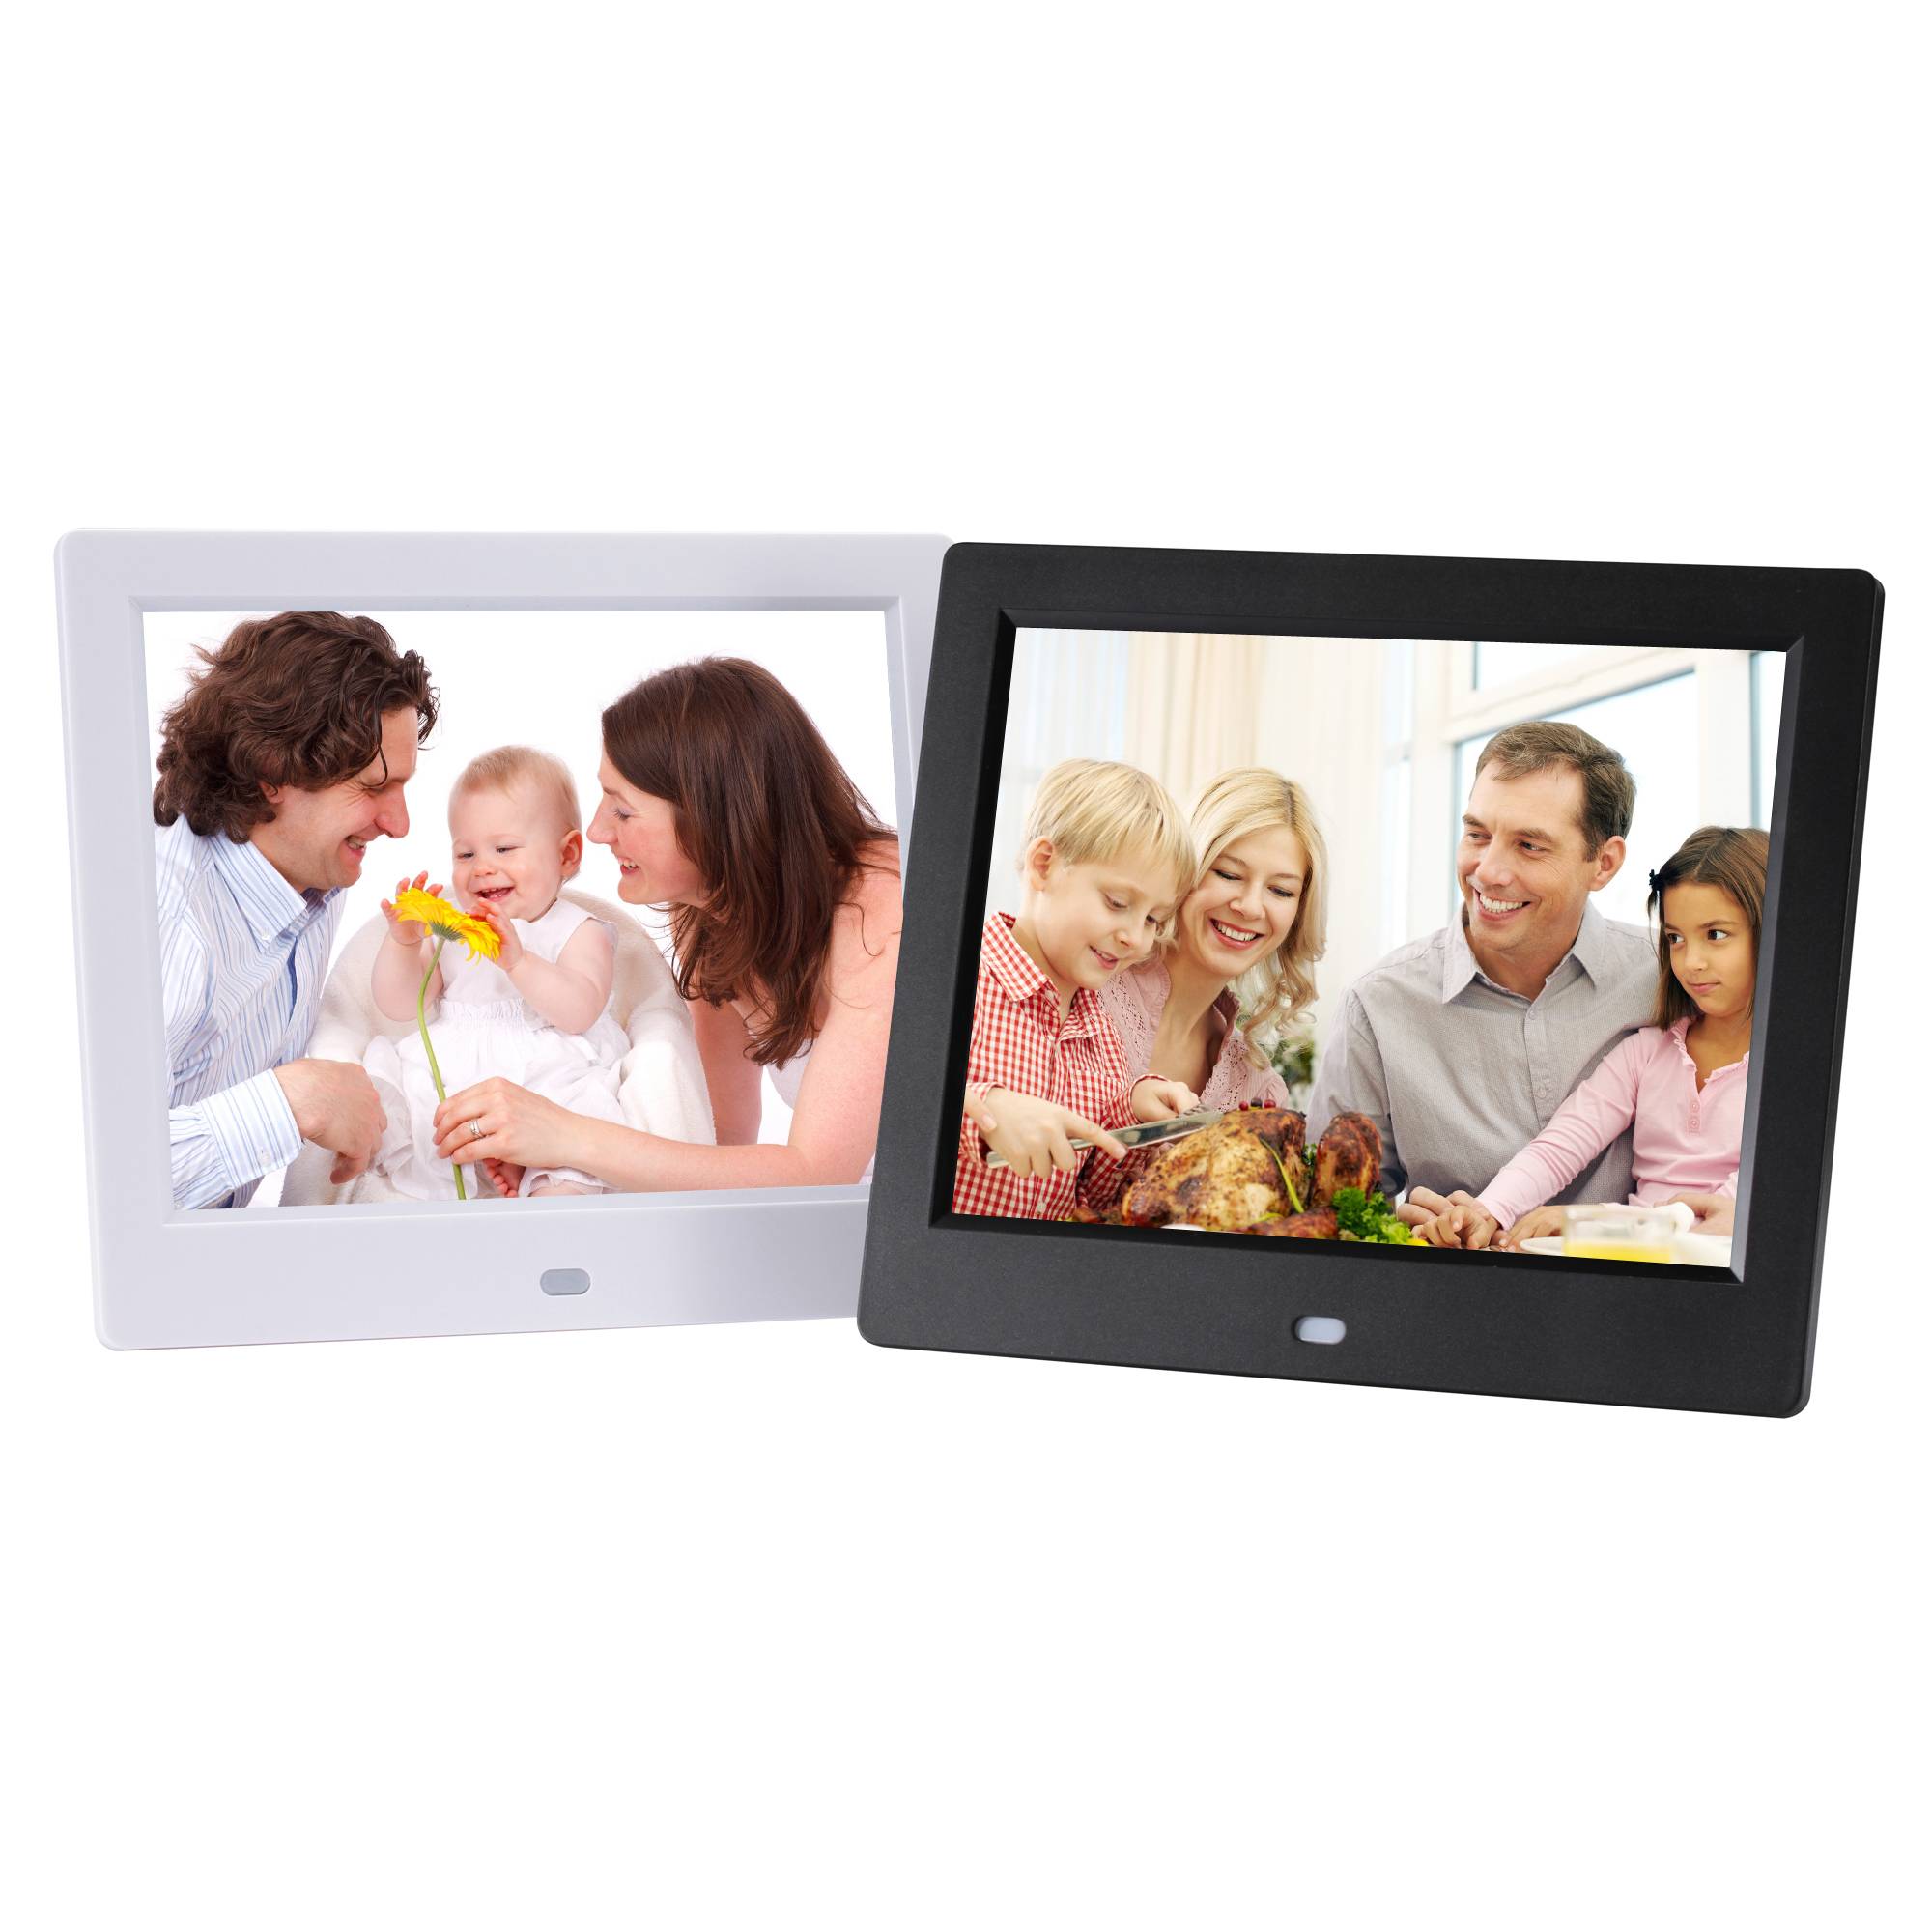 PriceList for Best Wifi Digital Photo Frame - 8 inch slideshow cheap video player digital picture frame digital photo frame commercial advertising HD support 720P – Idealway